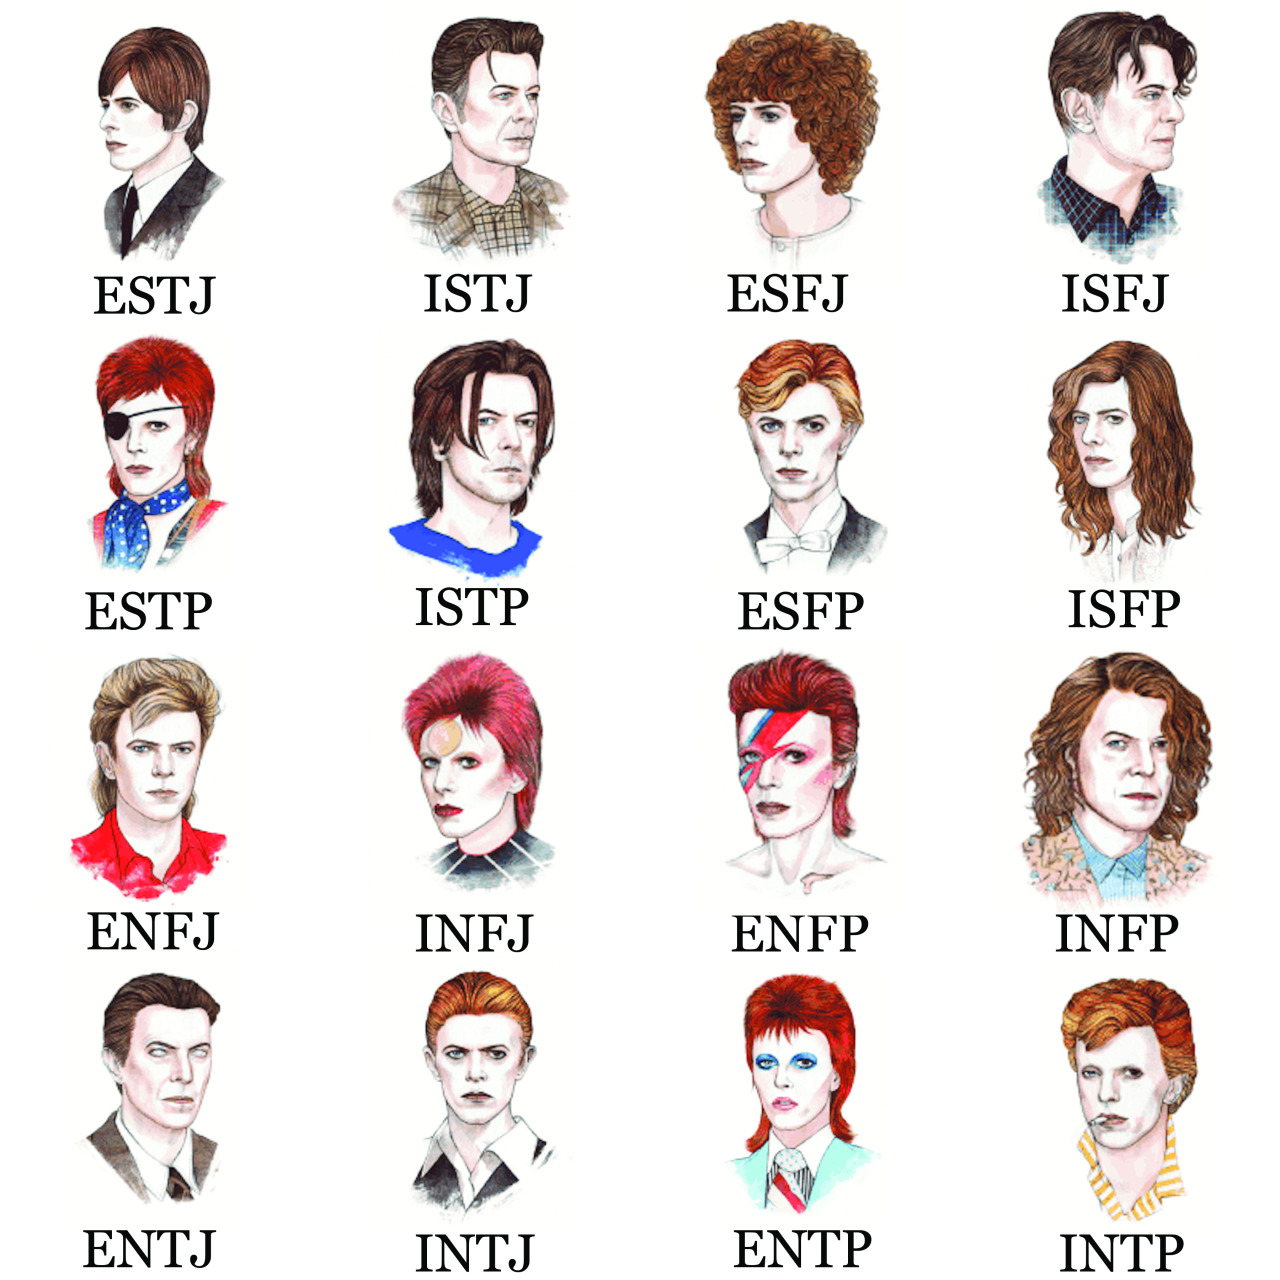 Stranger Things': Myers-Briggs Personality Types ~ The Fangirl Initiative